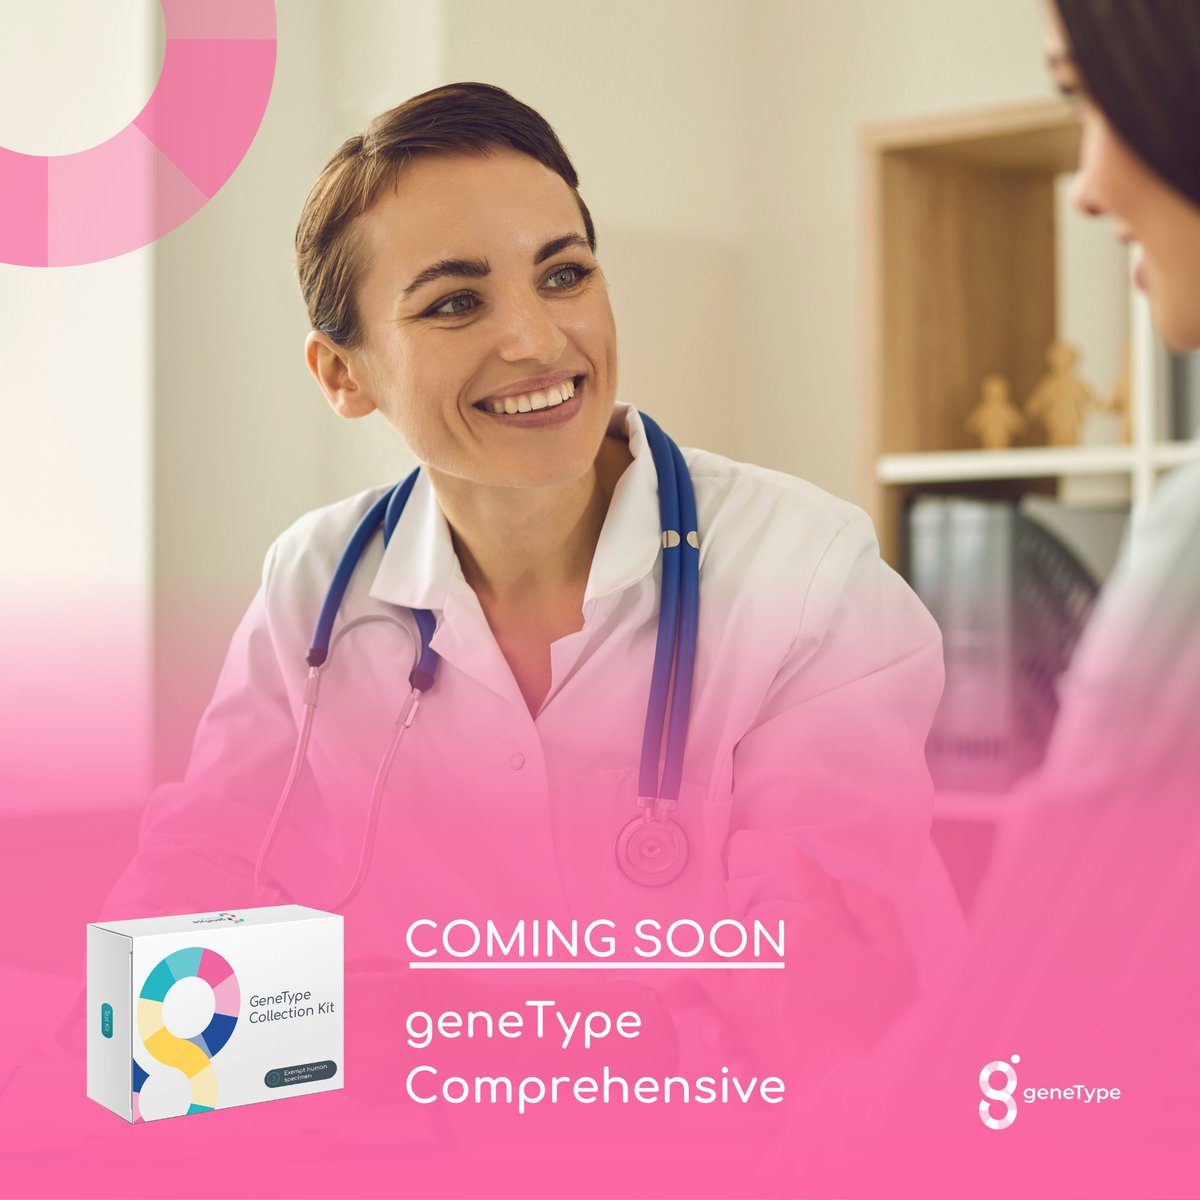 Coming soon: #geneType Comprehensive, incorporating a 13-gene Hereditary Breast and Ovarian Cancer (#HBOC) panel. Learn more- genetype.com/for-clinical-p… #breastcancer #ovariancancer #meded #KnowYourRisk #FOAMed #genomics #precisionmedicine #populationhealth